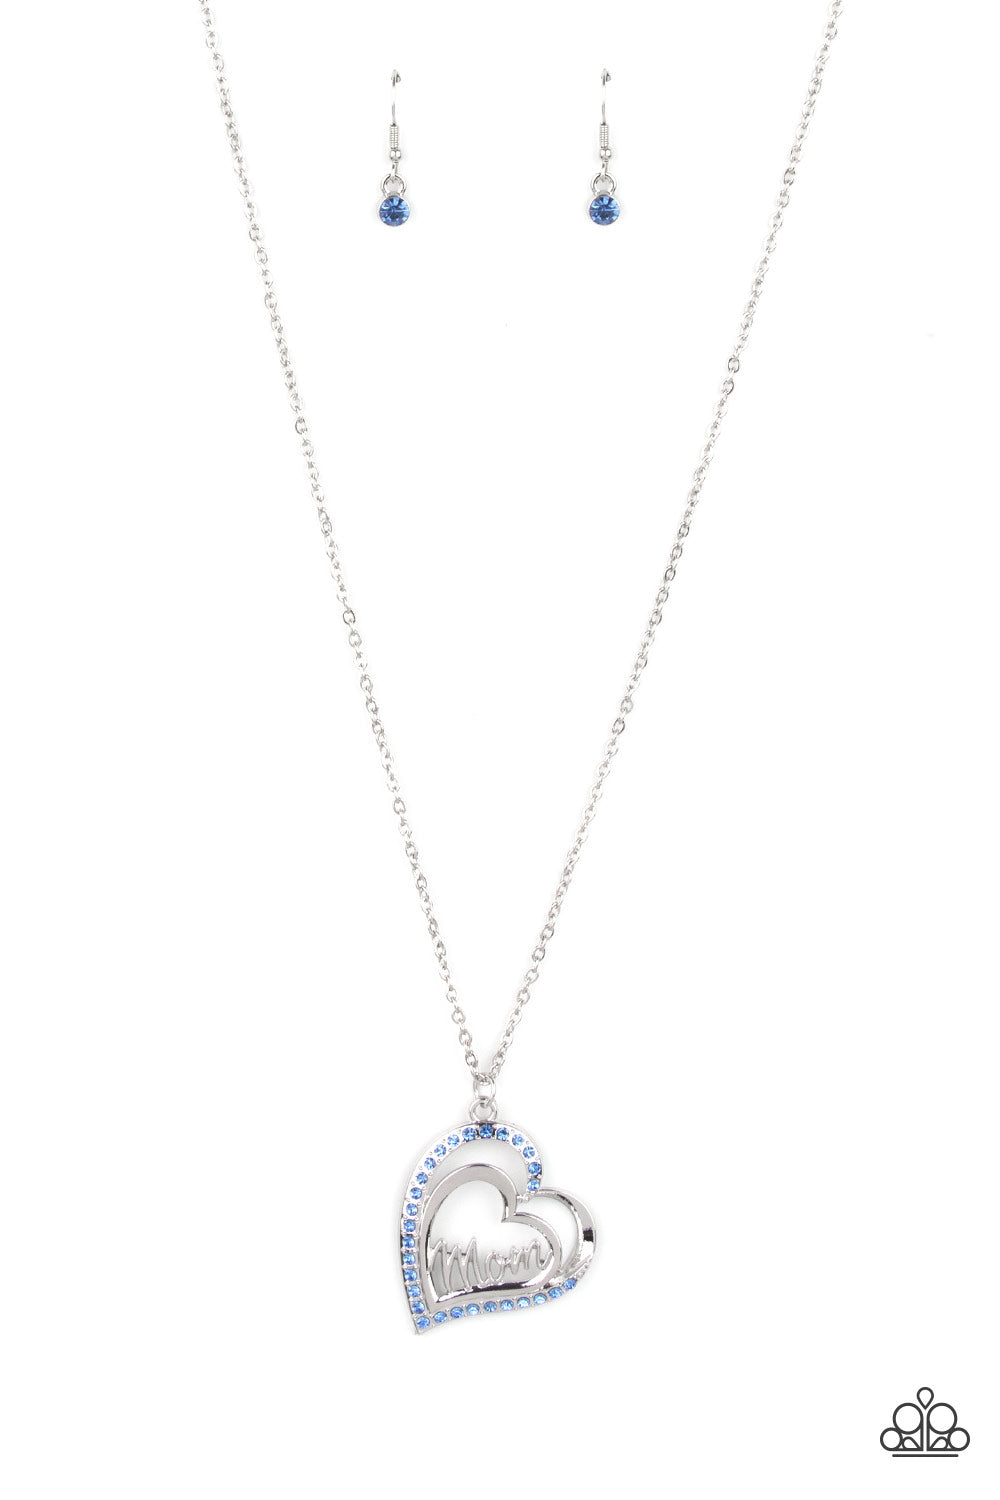 Paparazzi Necklace - A Mothers Heart - Blue